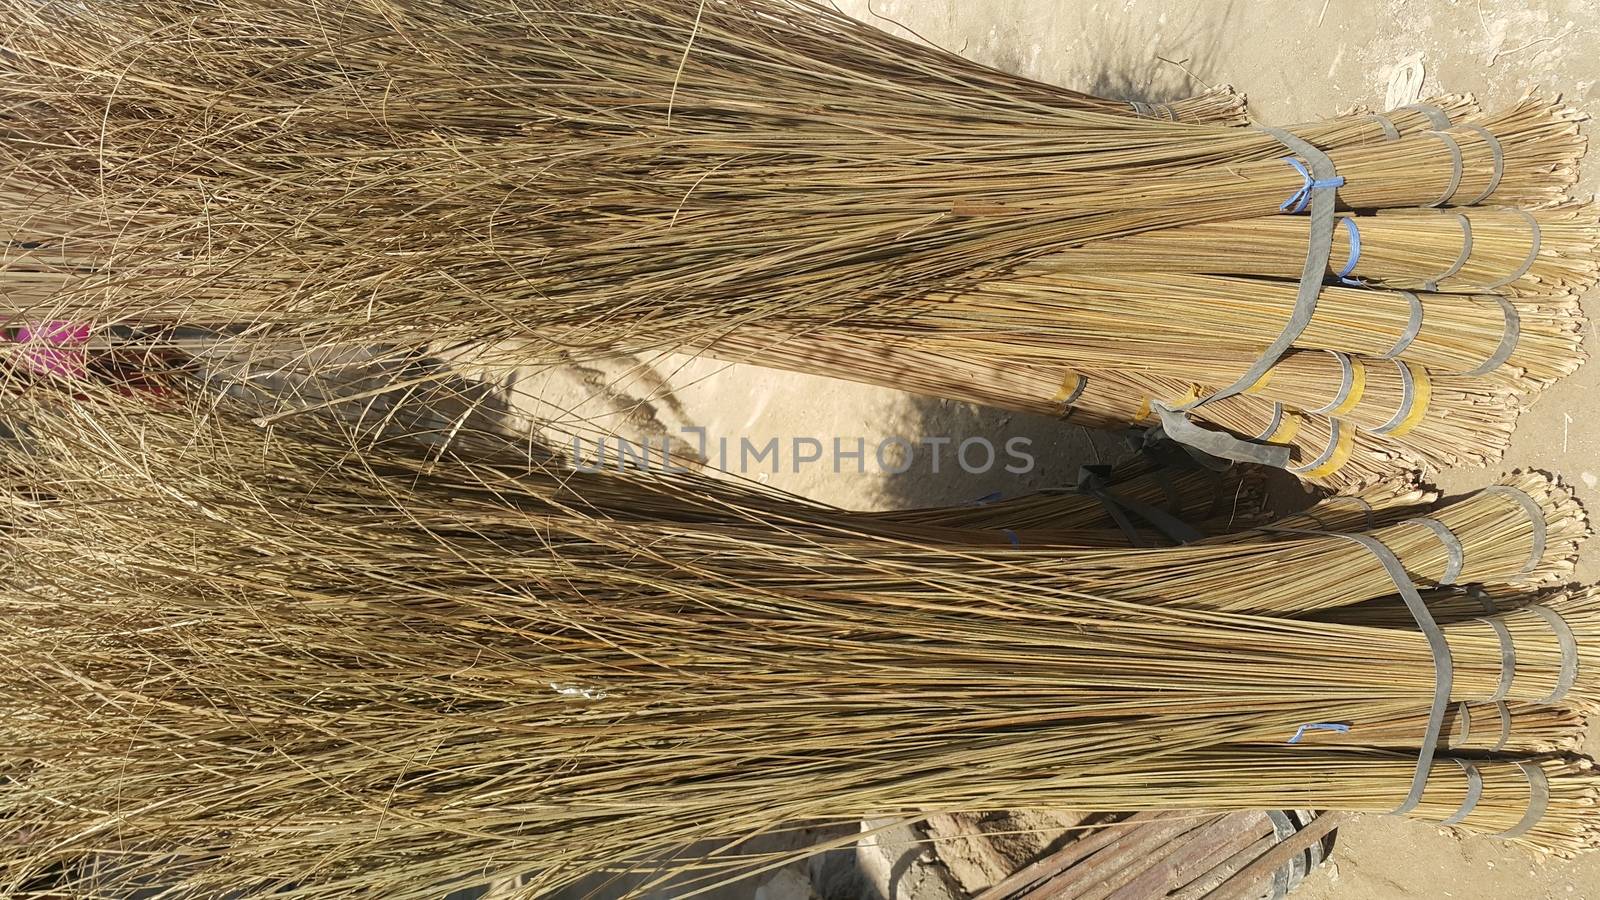 Bunch of brown colored straw broom. Old style broom used for housekeeping in rural area in Asian countries.